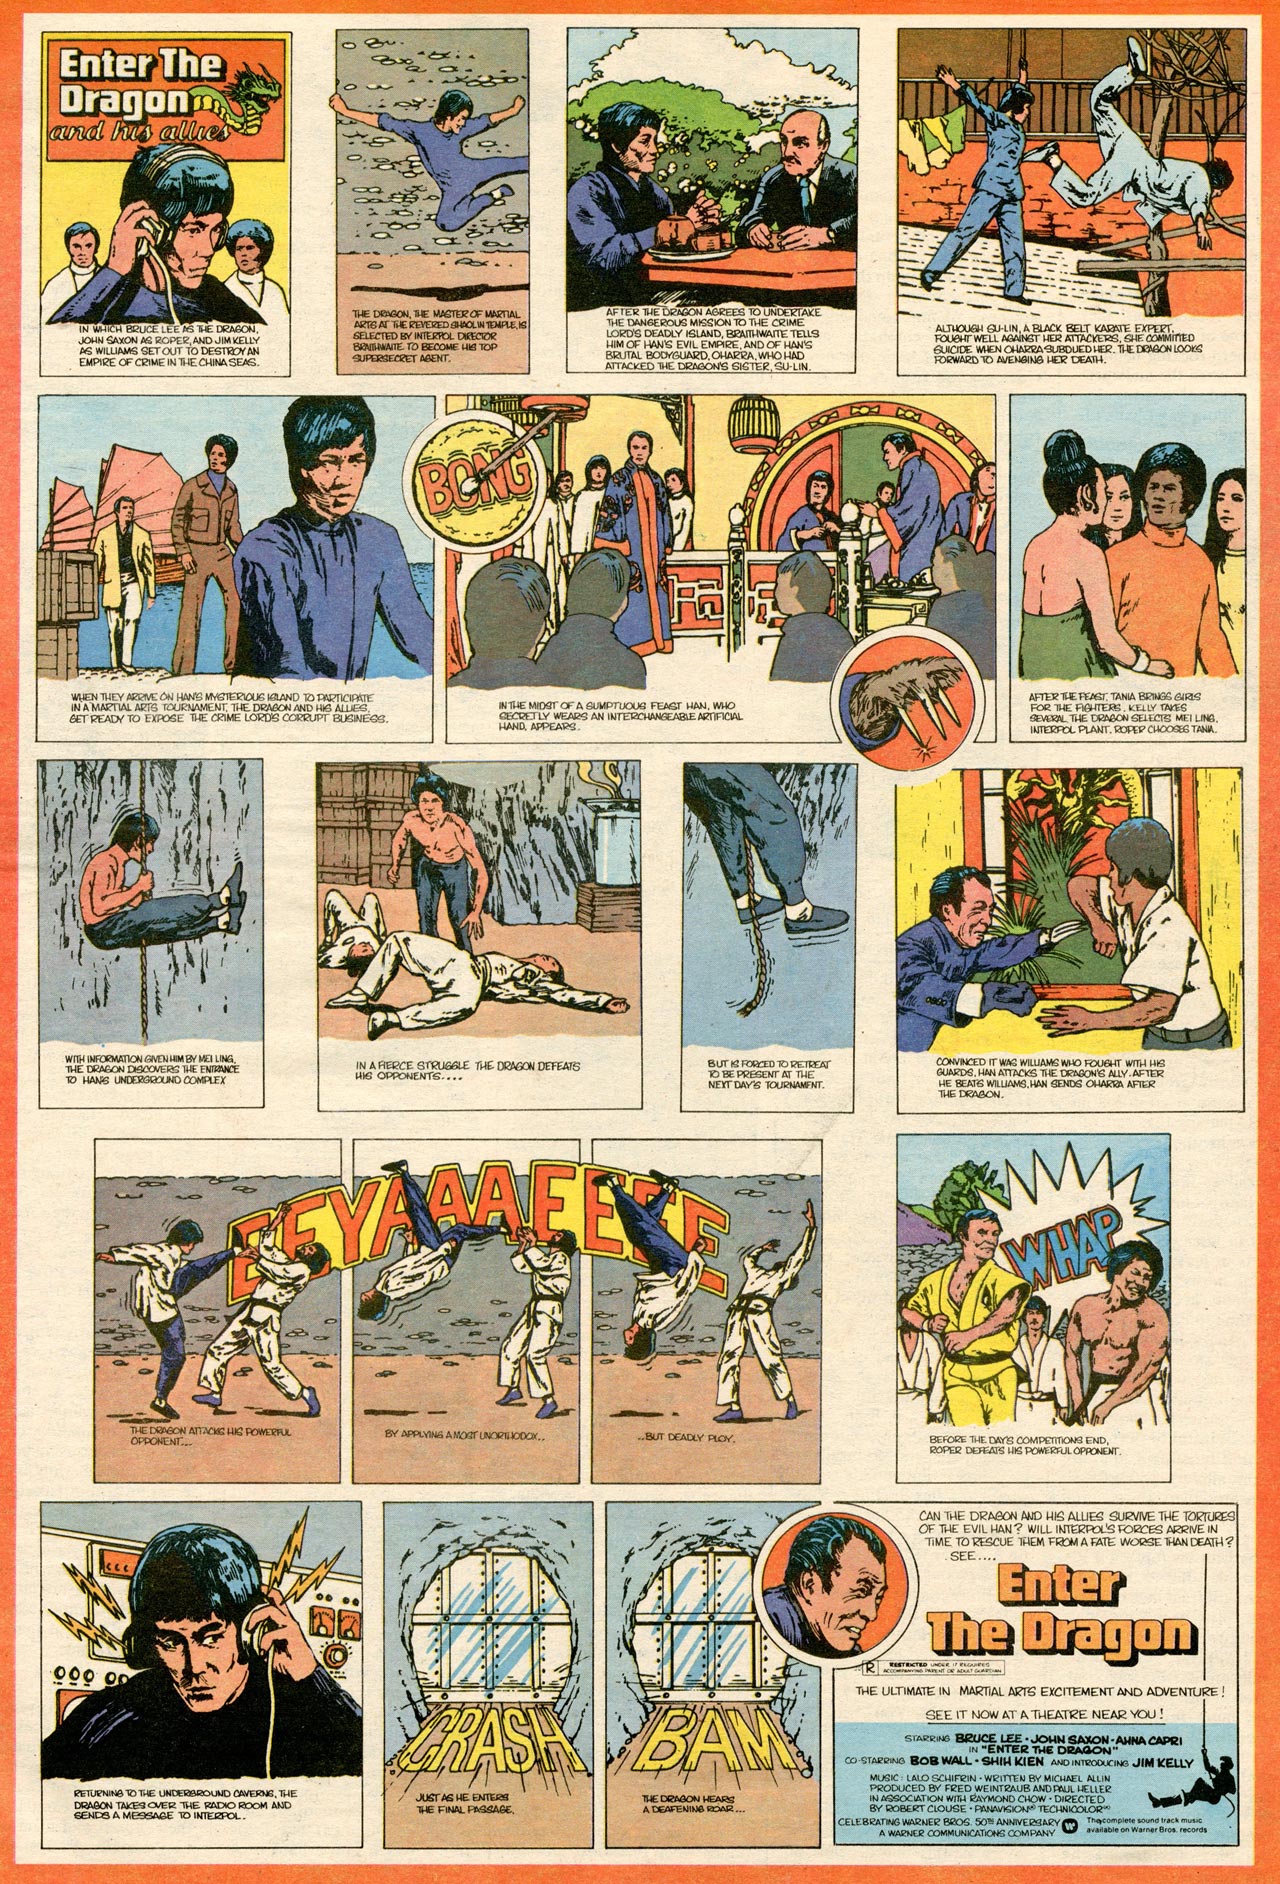 ‘Enter the Dragon’: Incredible comic advertisement for Bruce Lee’s swan song ...